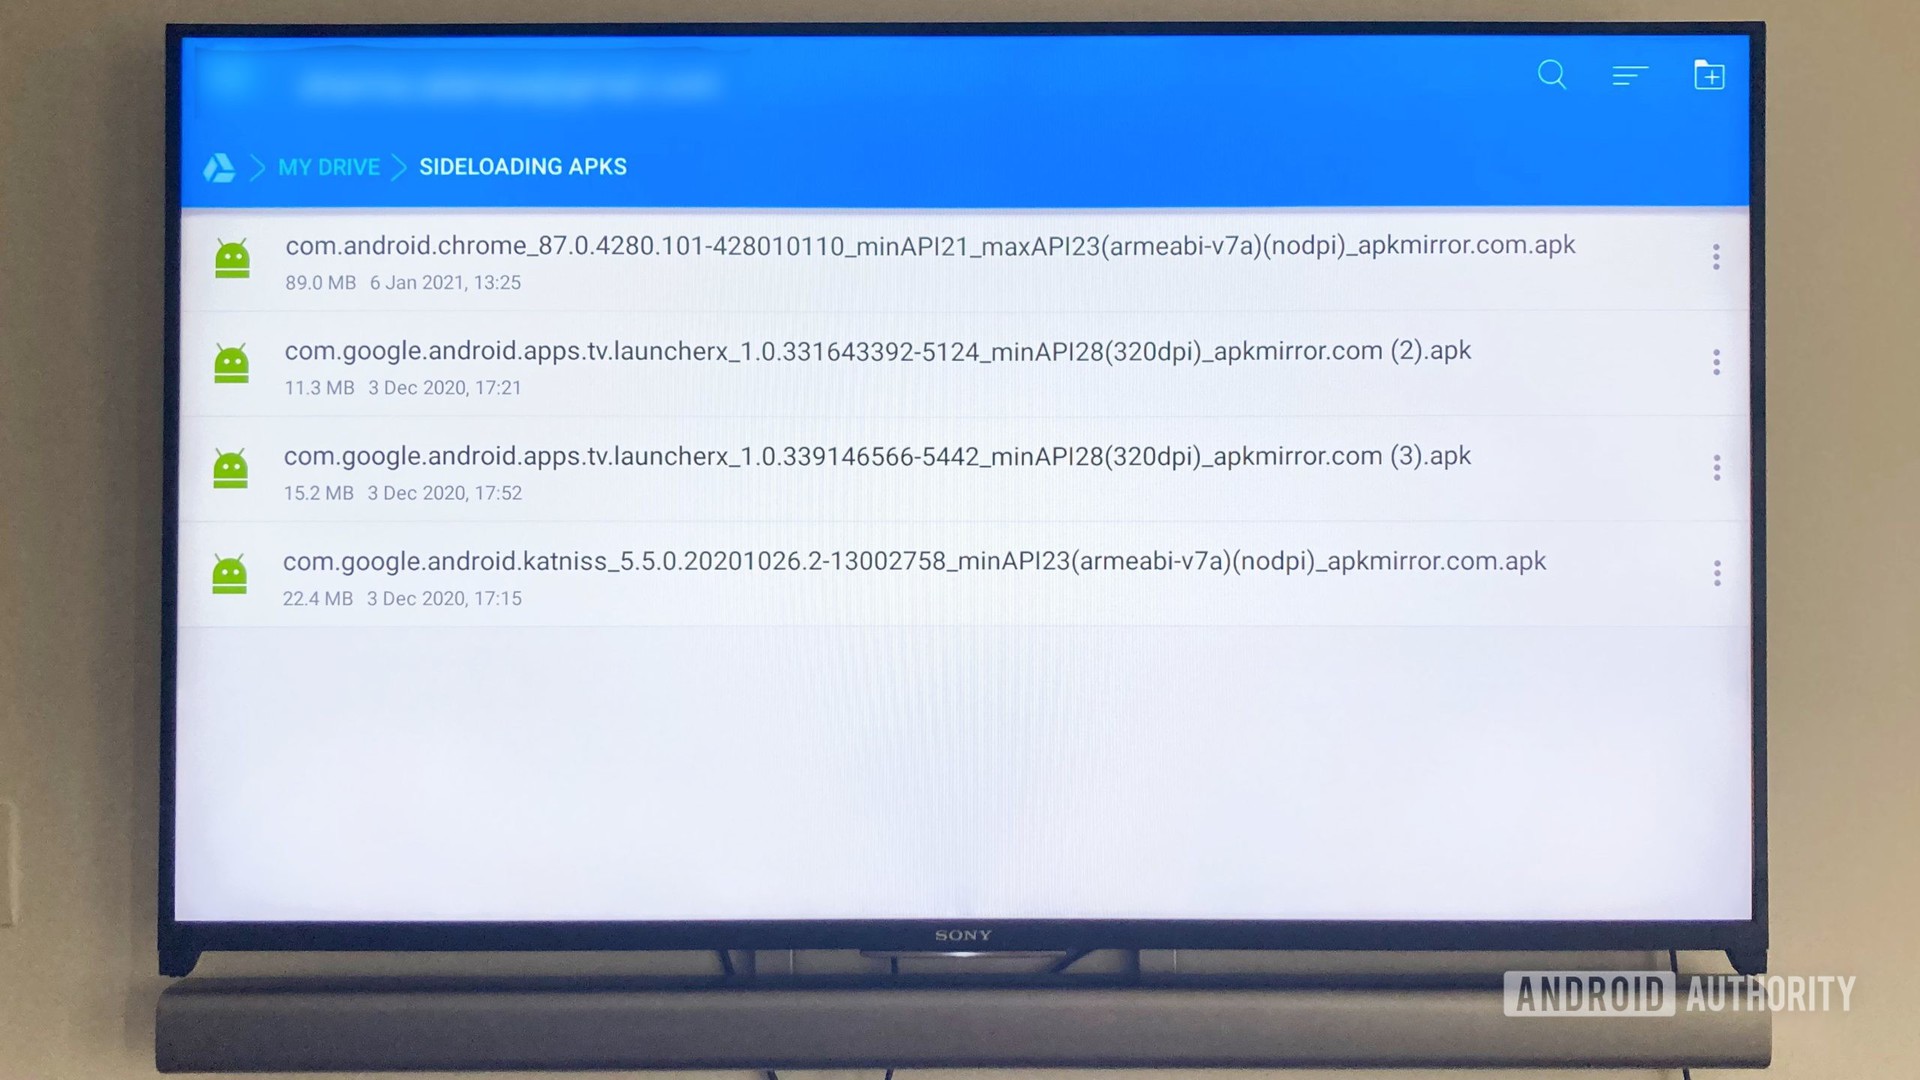 APK files On Google Drive For Sideloading Apps on Android TV